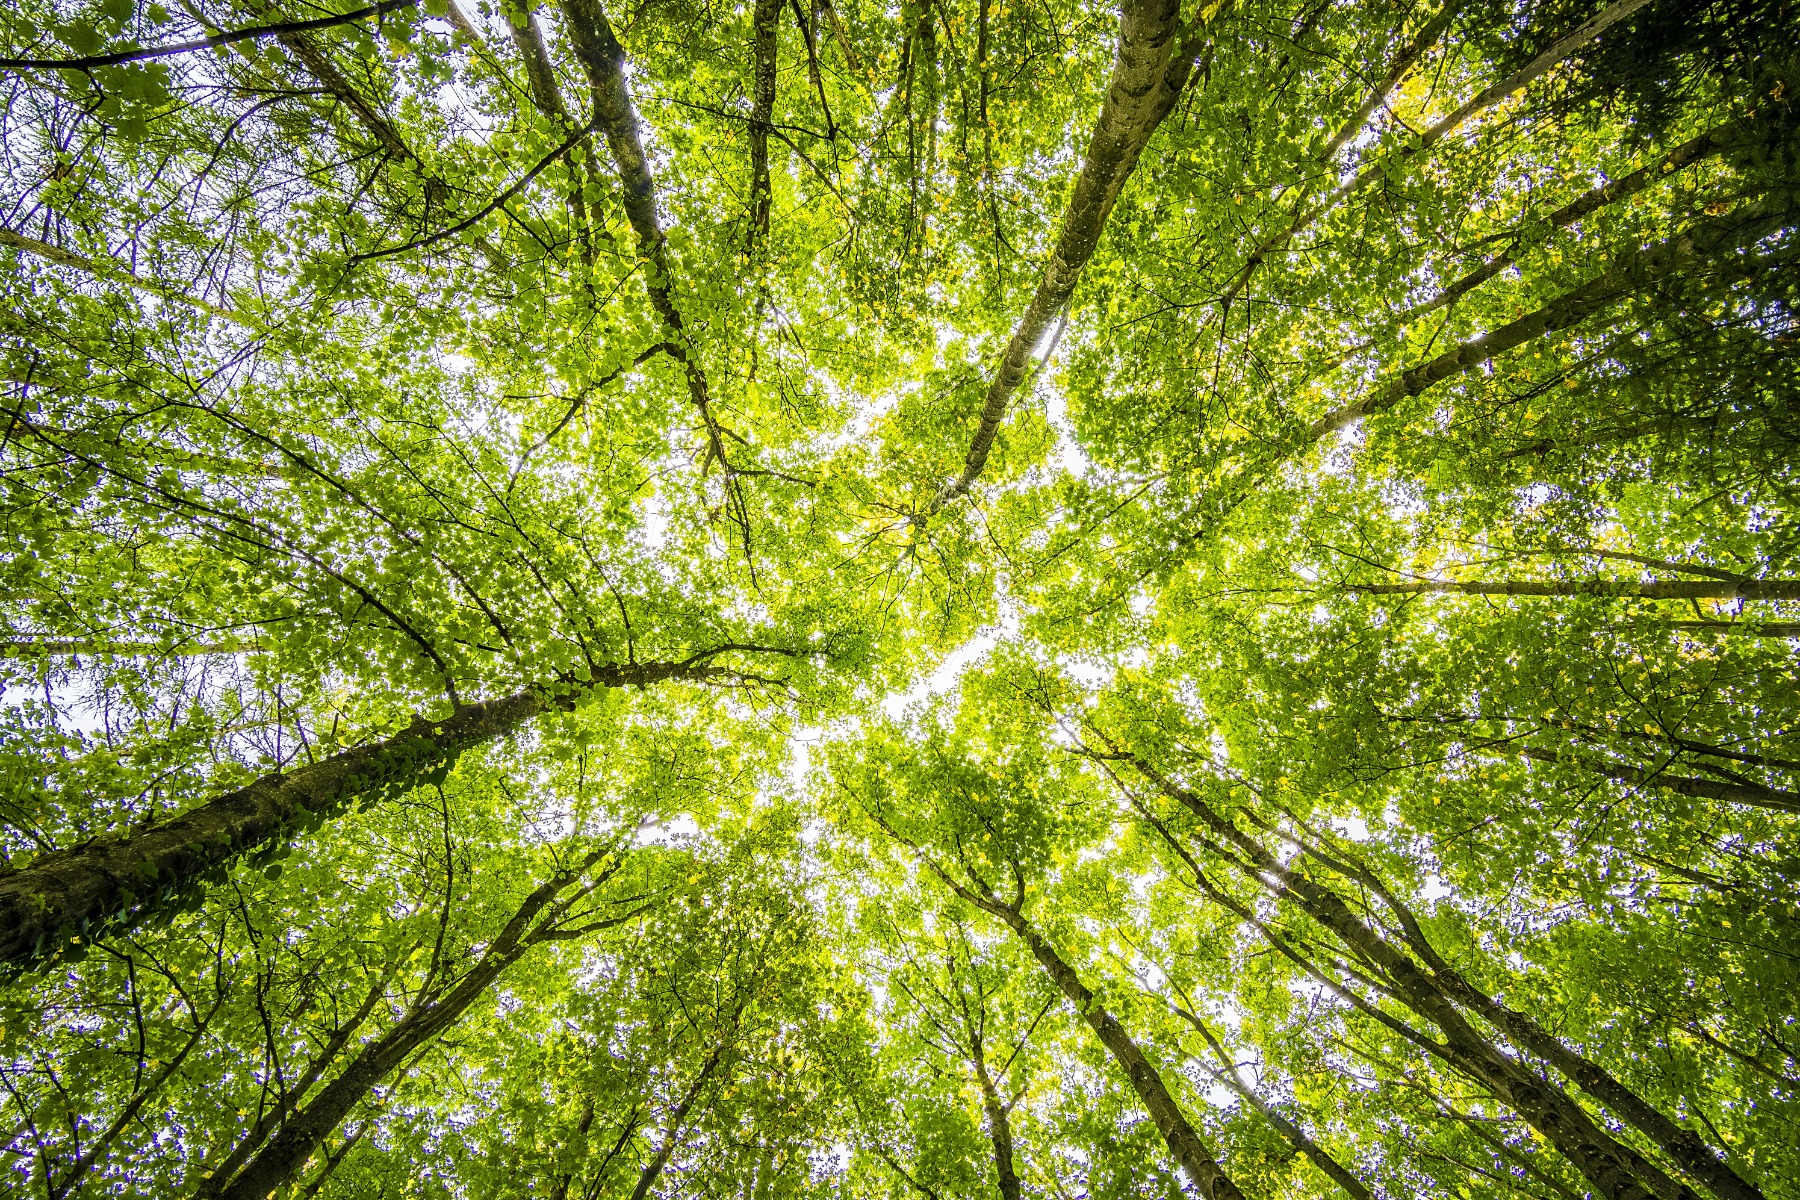 Green trees seen from the ground below